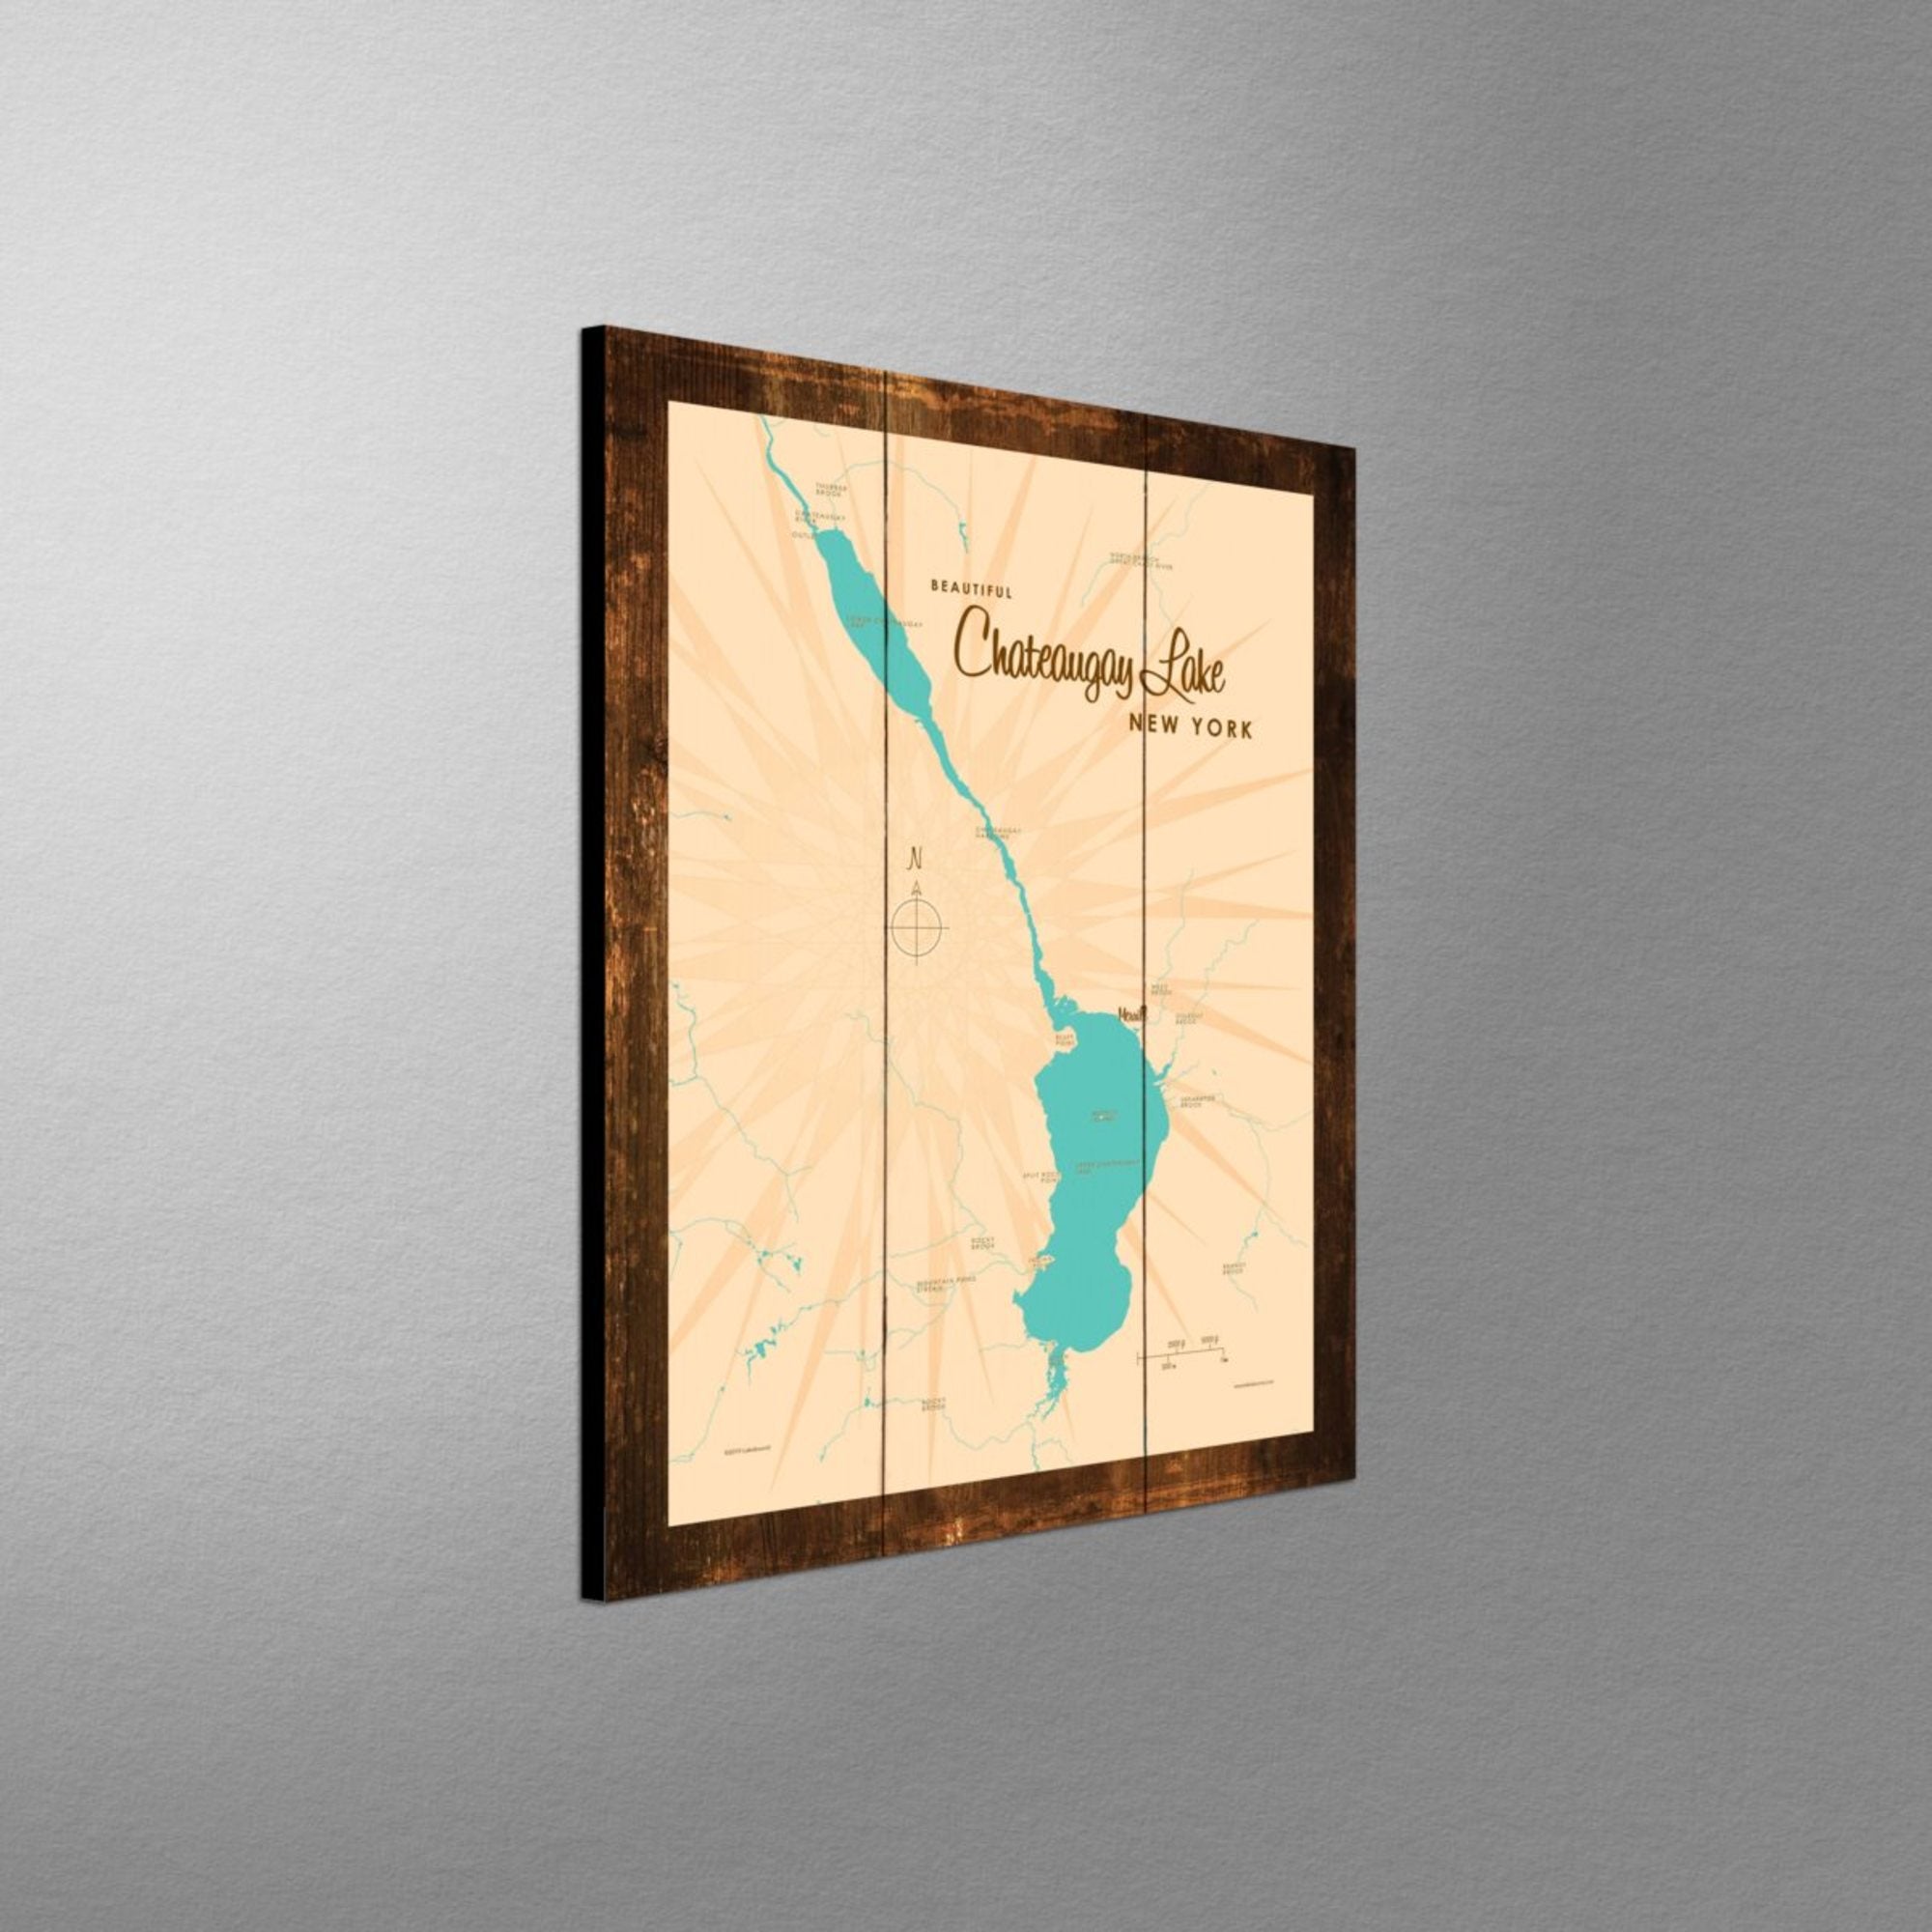 Chateaugay Lake New York, Rustic Wood Sign Map Art